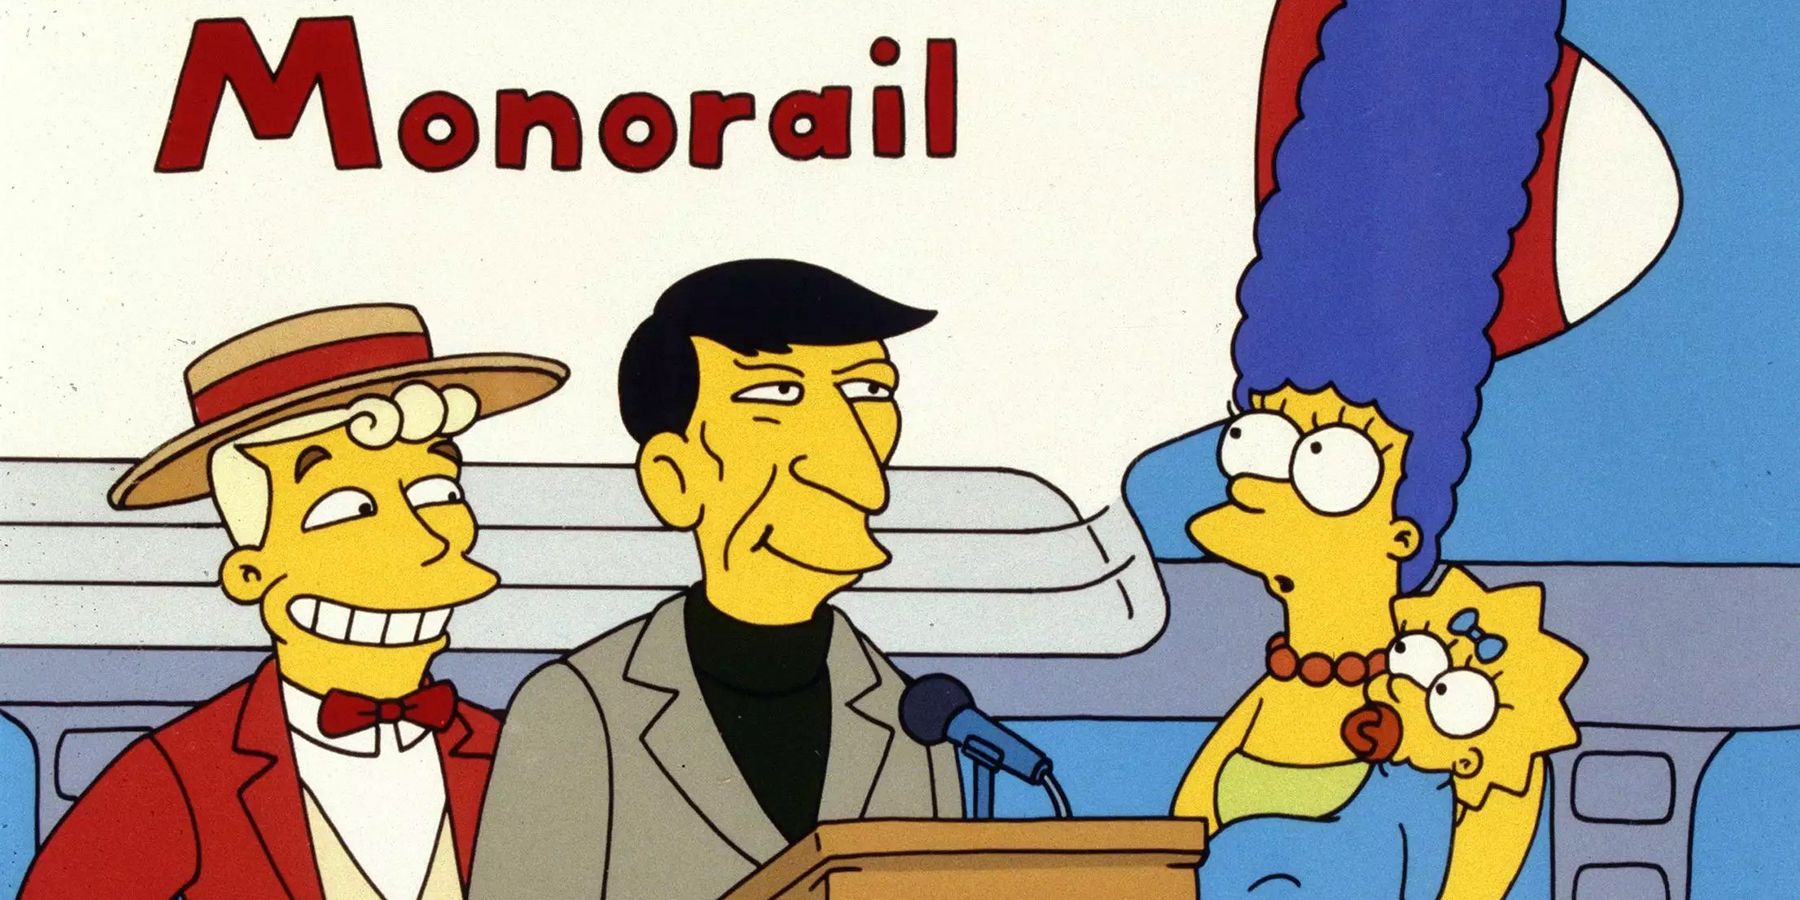 The Simpsons Marge vs the Monorail.